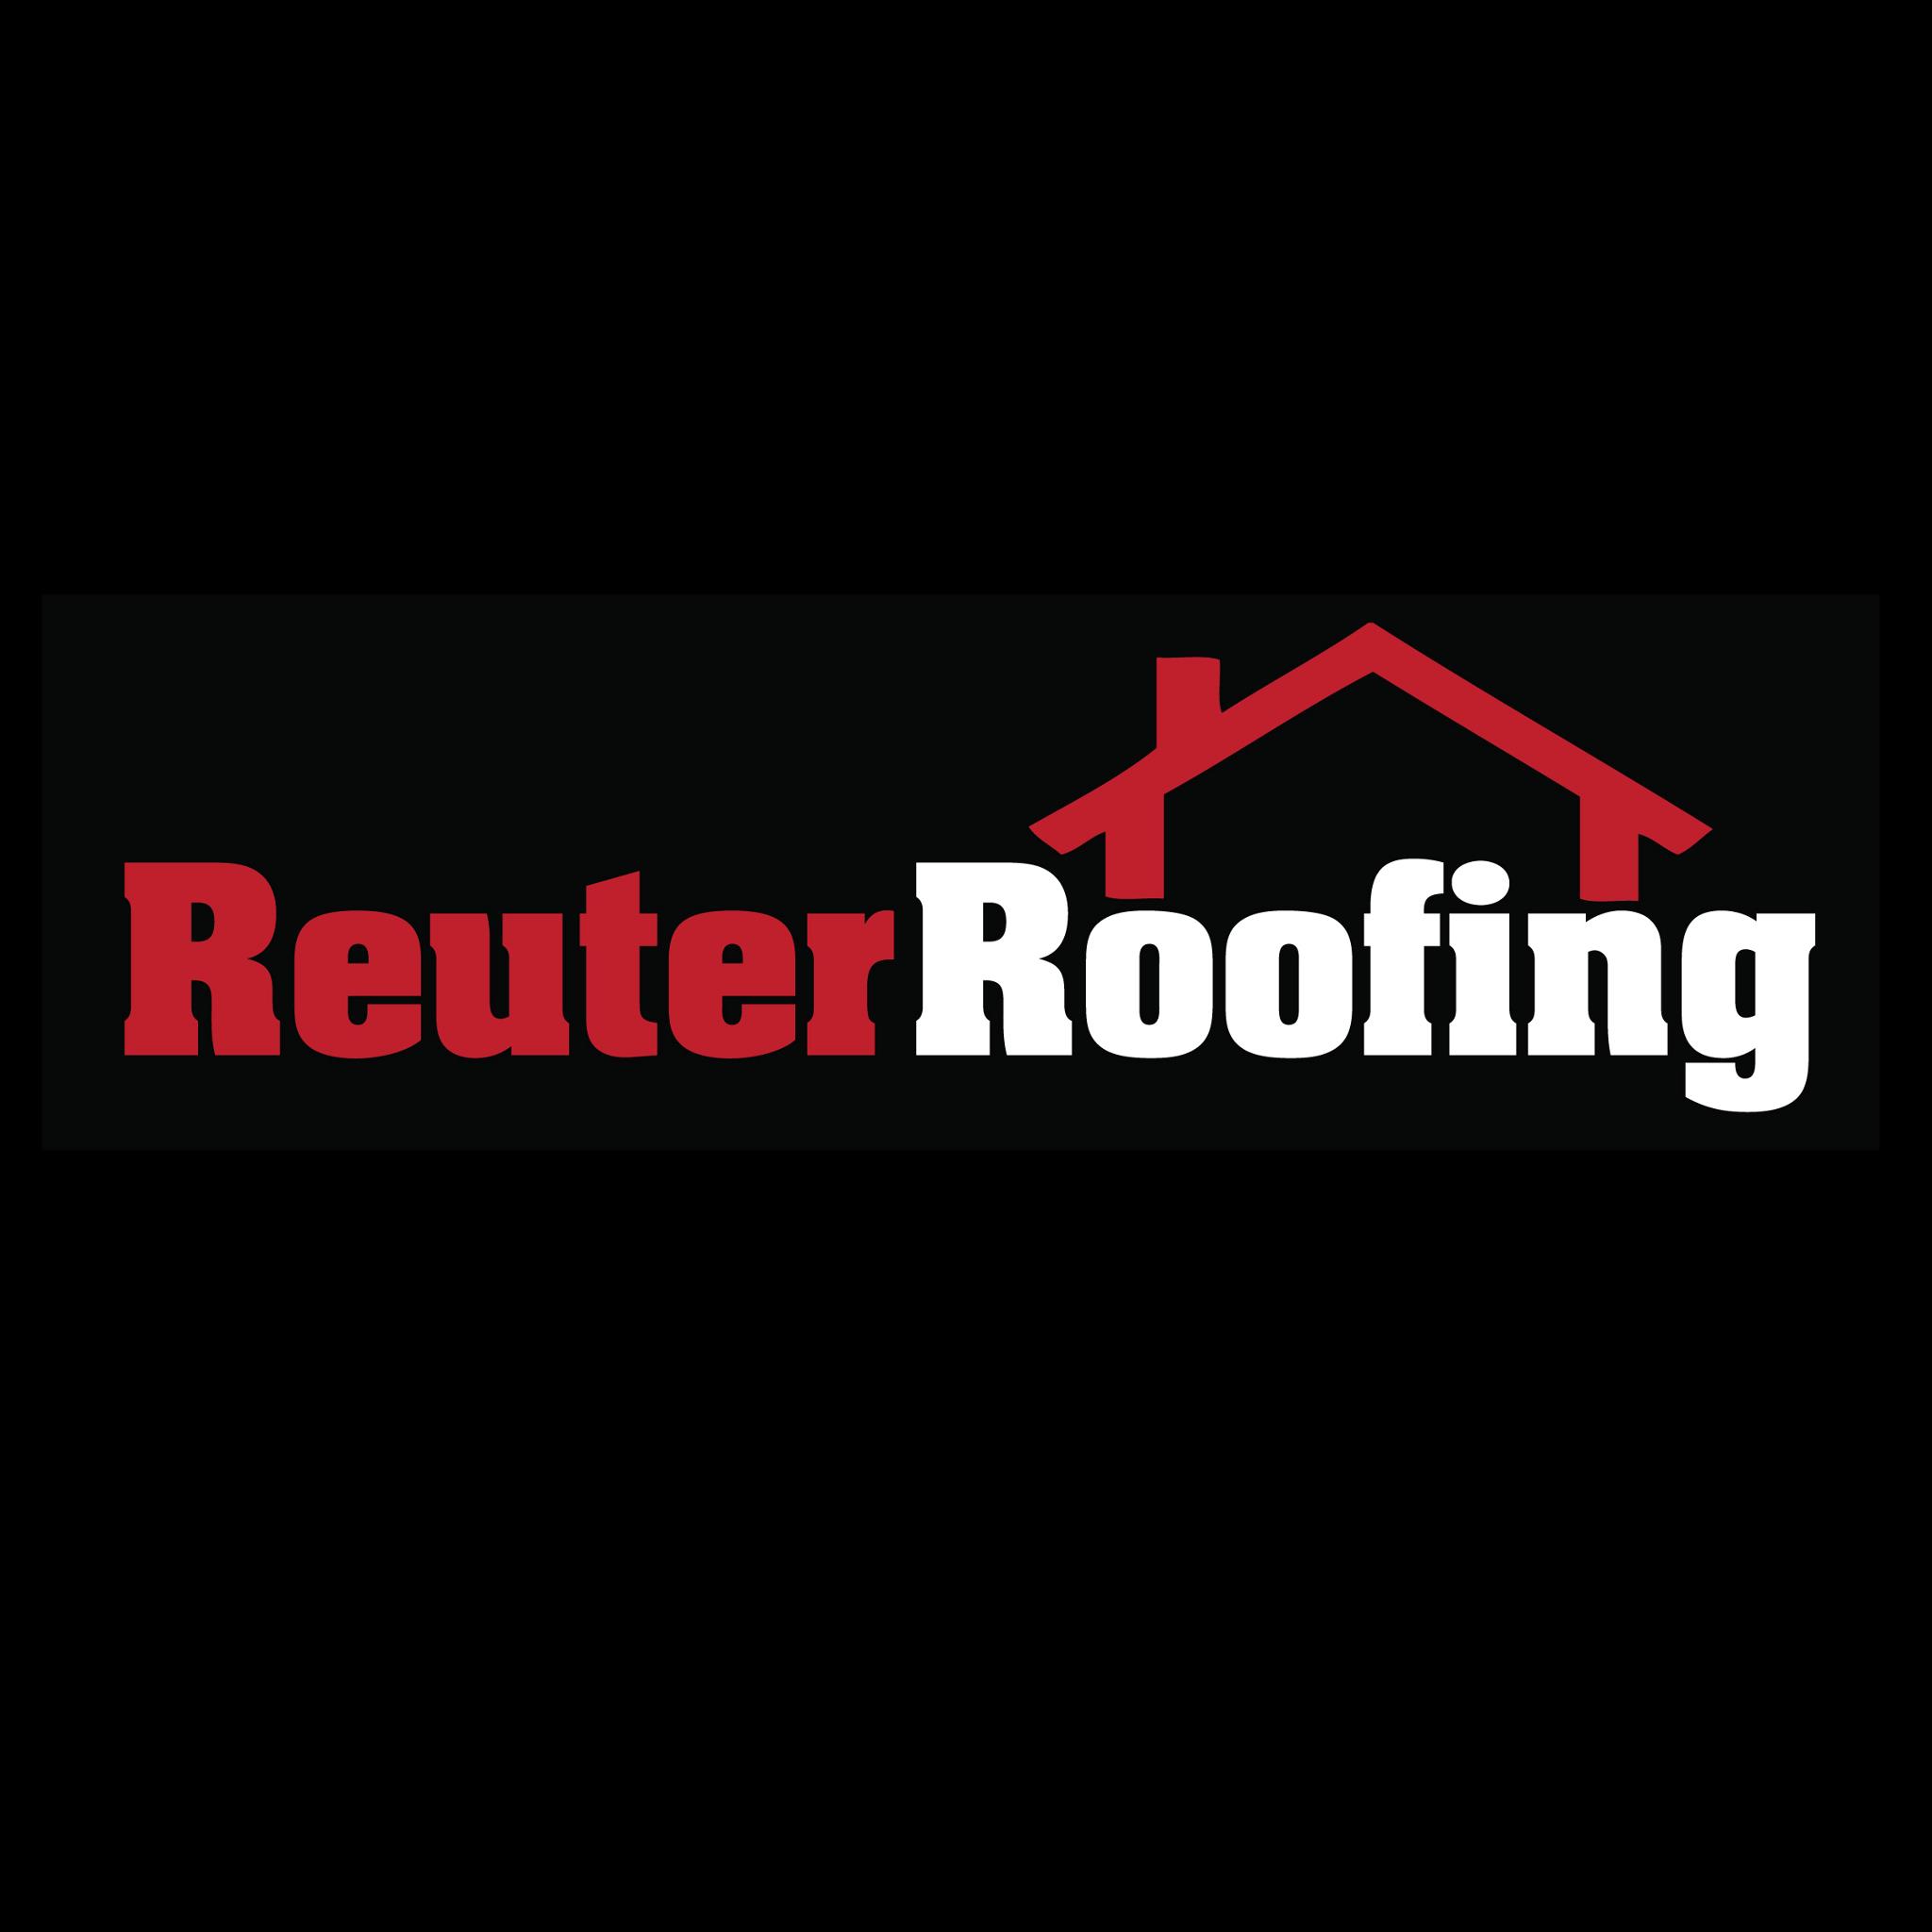 Reuter Roofing